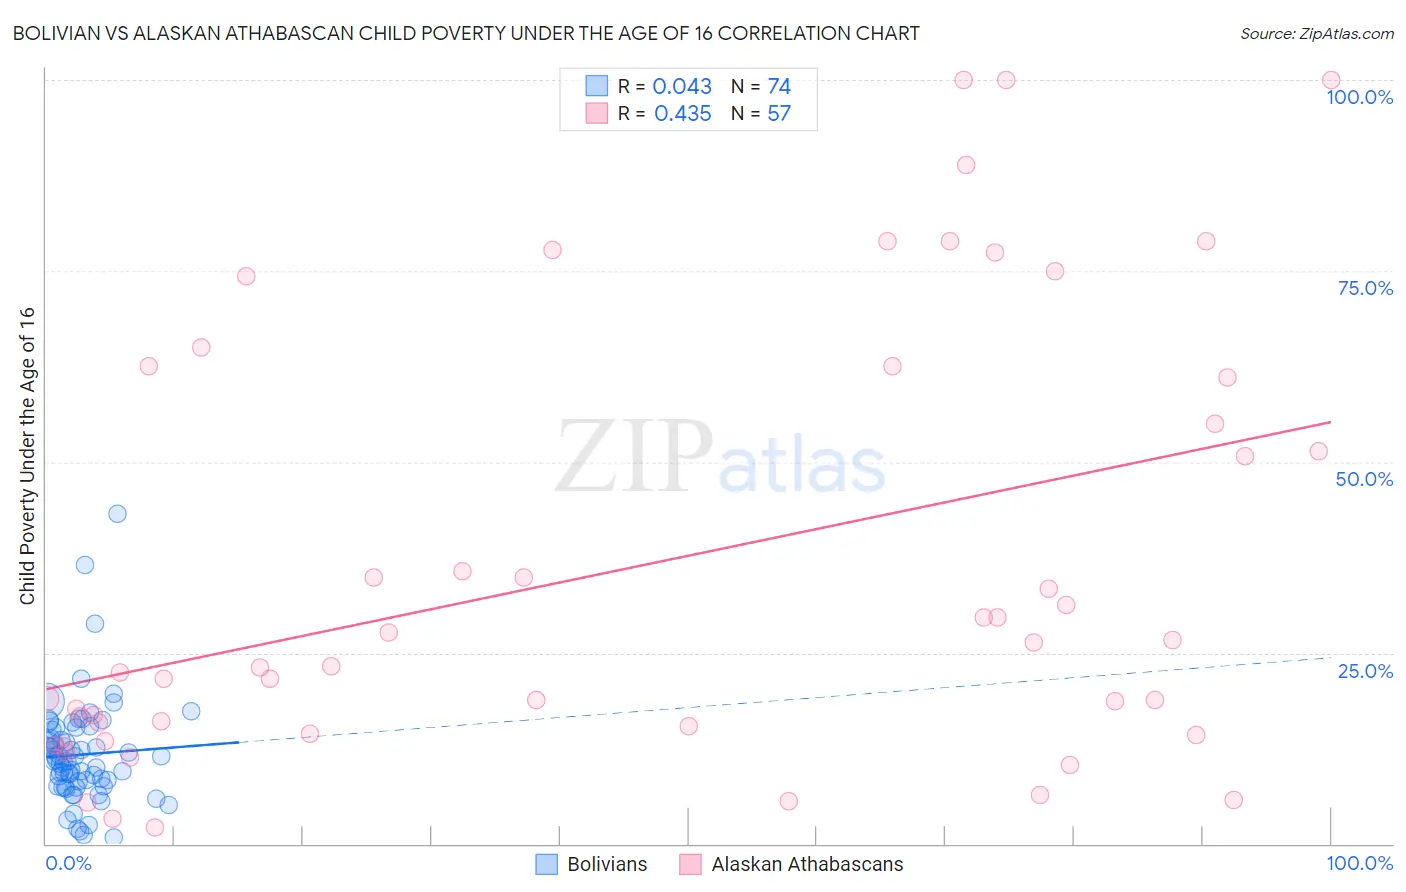 Bolivian vs Alaskan Athabascan Child Poverty Under the Age of 16